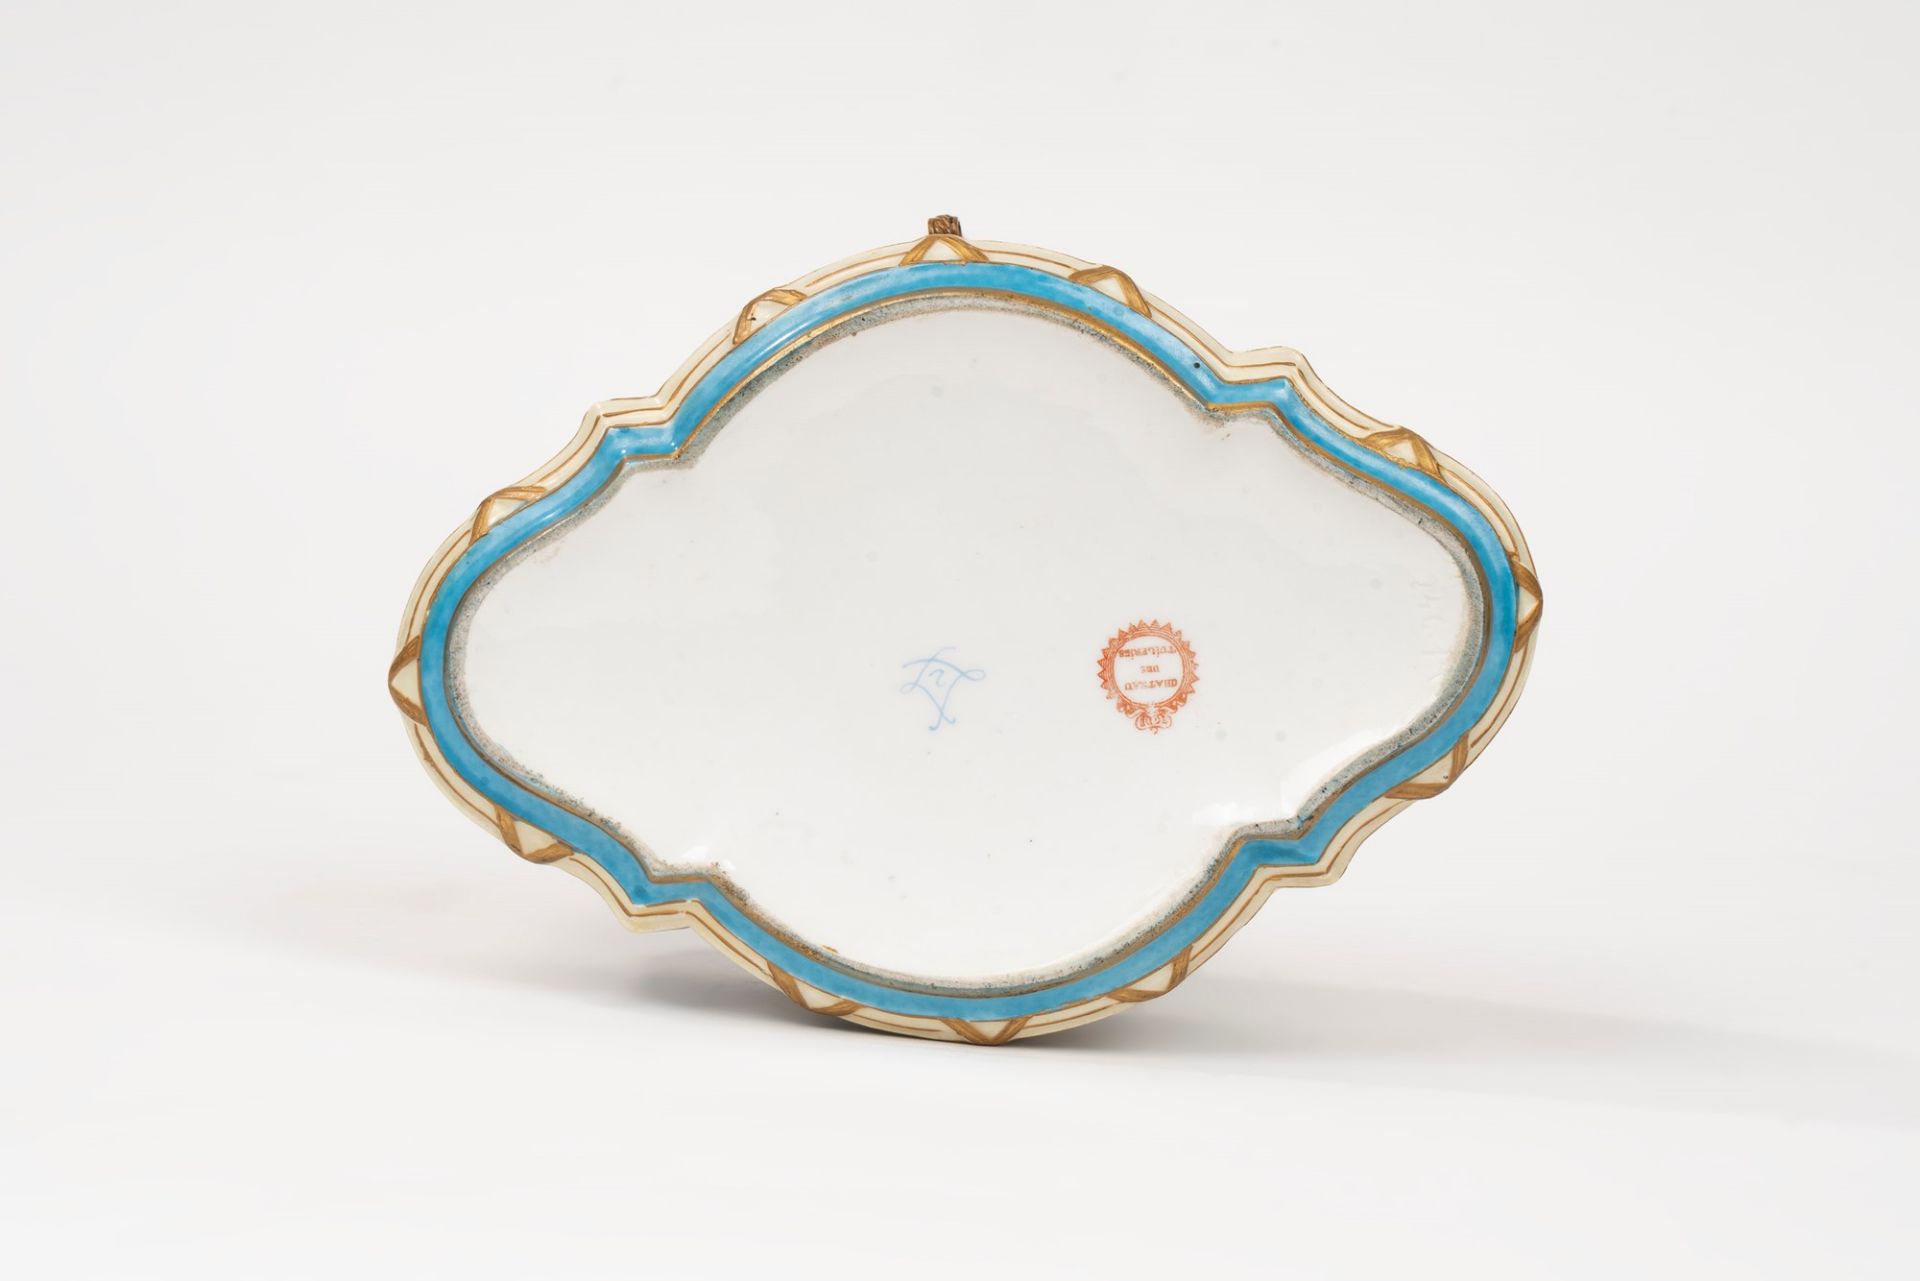 Polychrome porcelain box with gilded bronze finishes, Sevres manufacture, late 19th century - Image 4 of 4